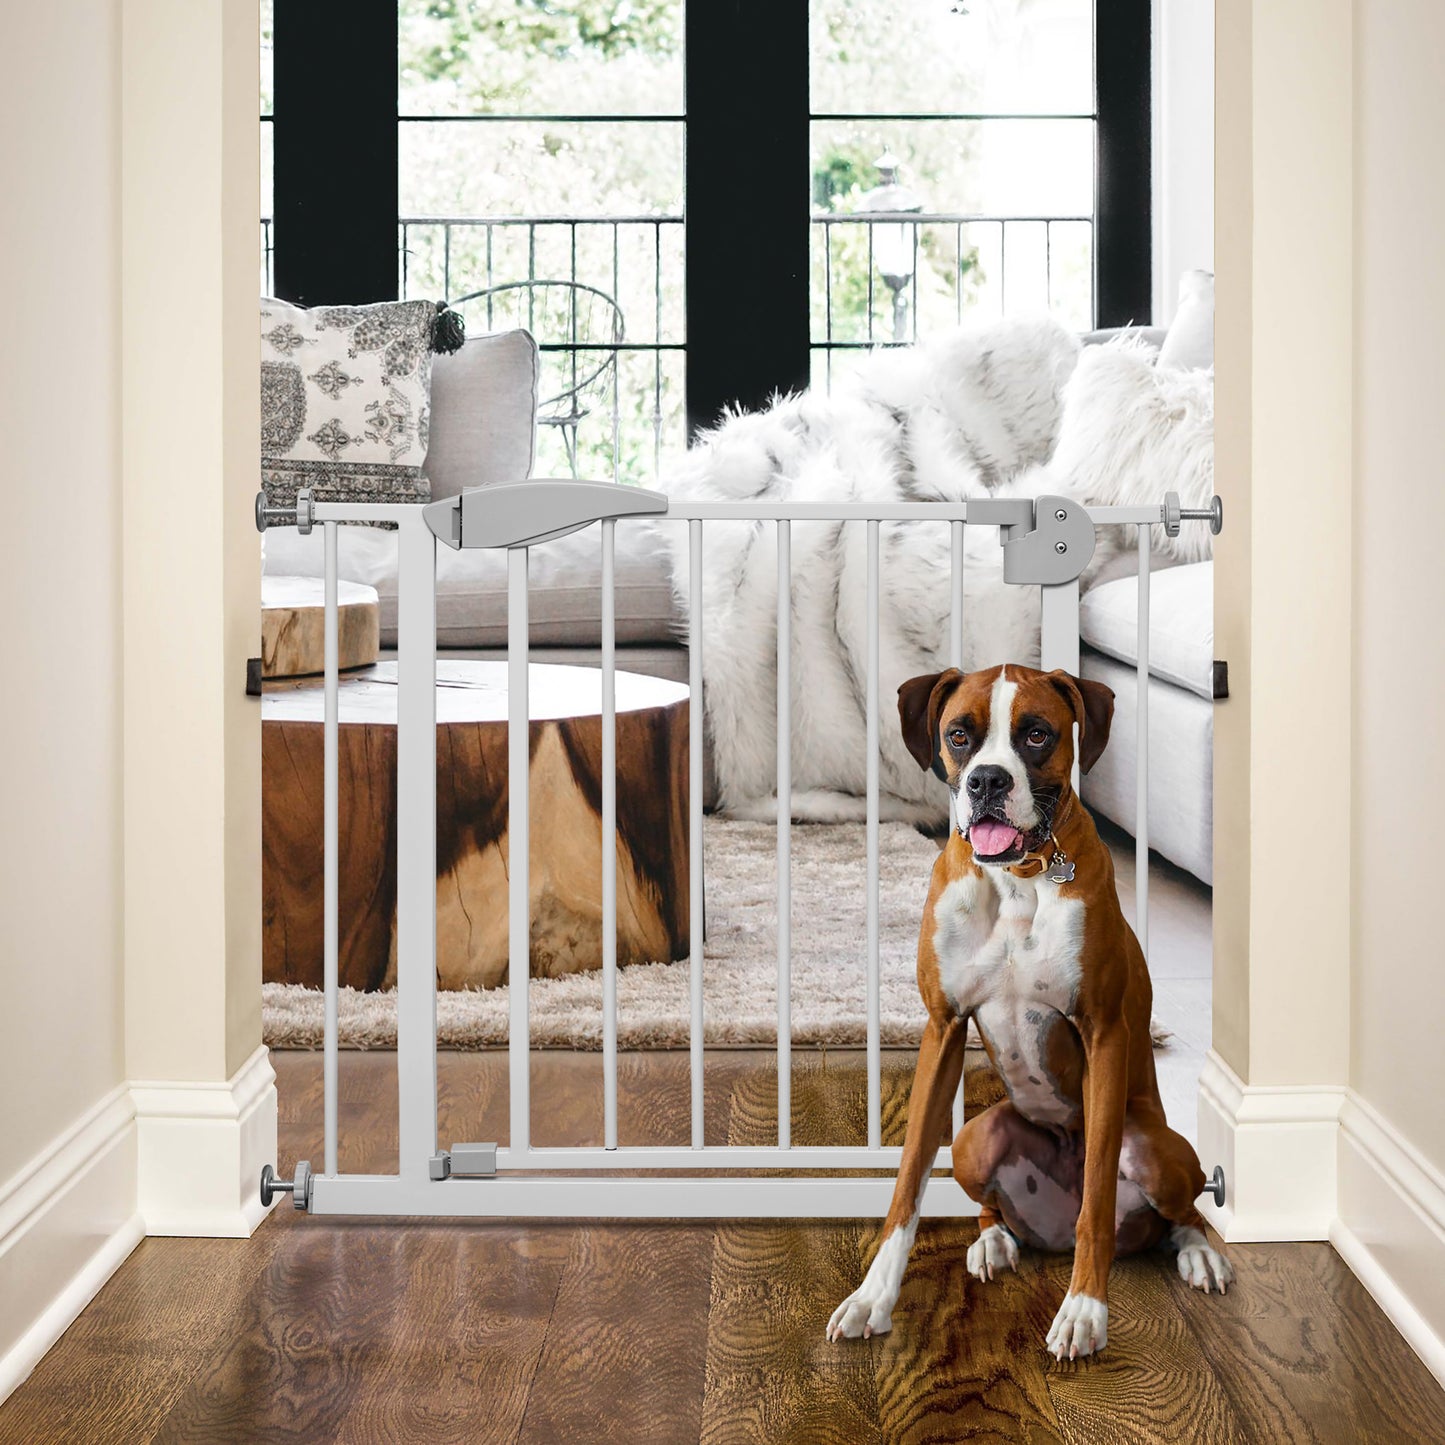 Easy Assembly Pet Gate Safety Gate Durability Dog Gate For House, Stairs, Doorways, Fits Openings 29.5" to 32"